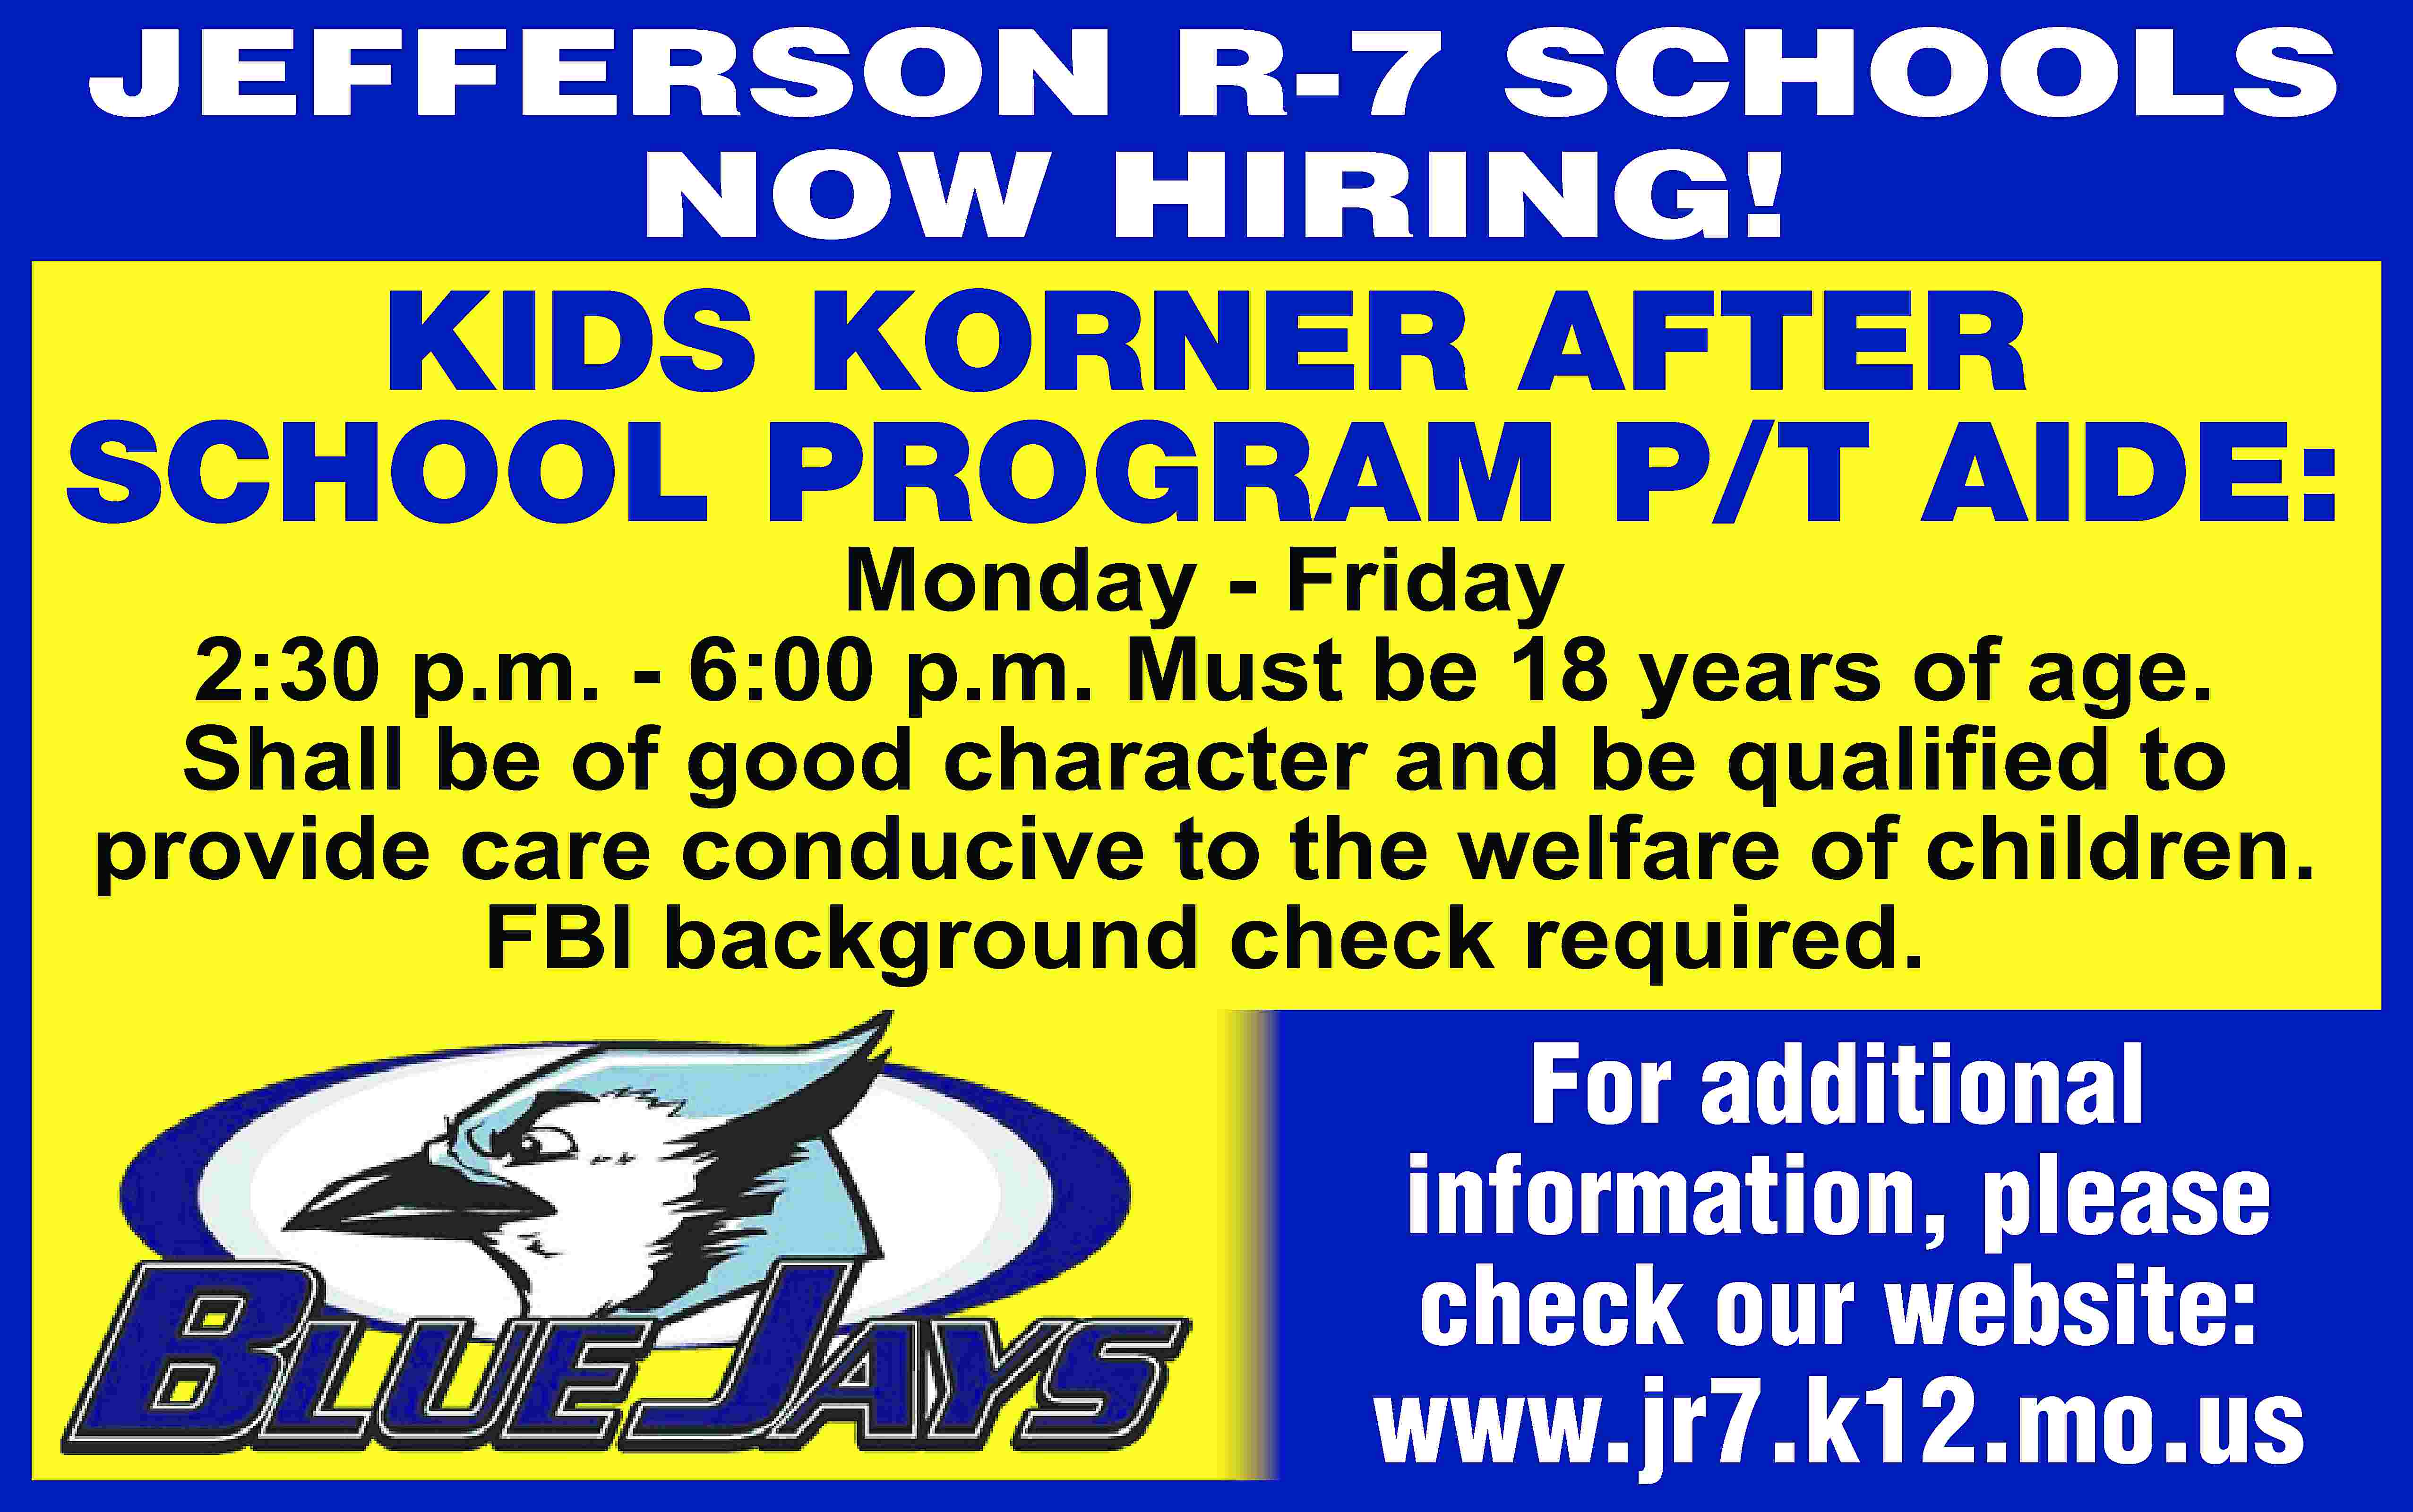 JEFFERSON R-7 SCHOOLS NOW HIRING!  JEFFERSON R-7 SCHOOLS NOW HIRING! KIDS KORNER AFTER SCHOOL PROGRAM P/T AIDE: Monday - Friday 2:30 p.m. - 6:00 p.m. Must be 18 years of age. Shall be of good character and be qualiﬁed to provide care conducive to the welfare of children. FBI background check required. For additional information, please check our website: www.jr7.k12.mo.us